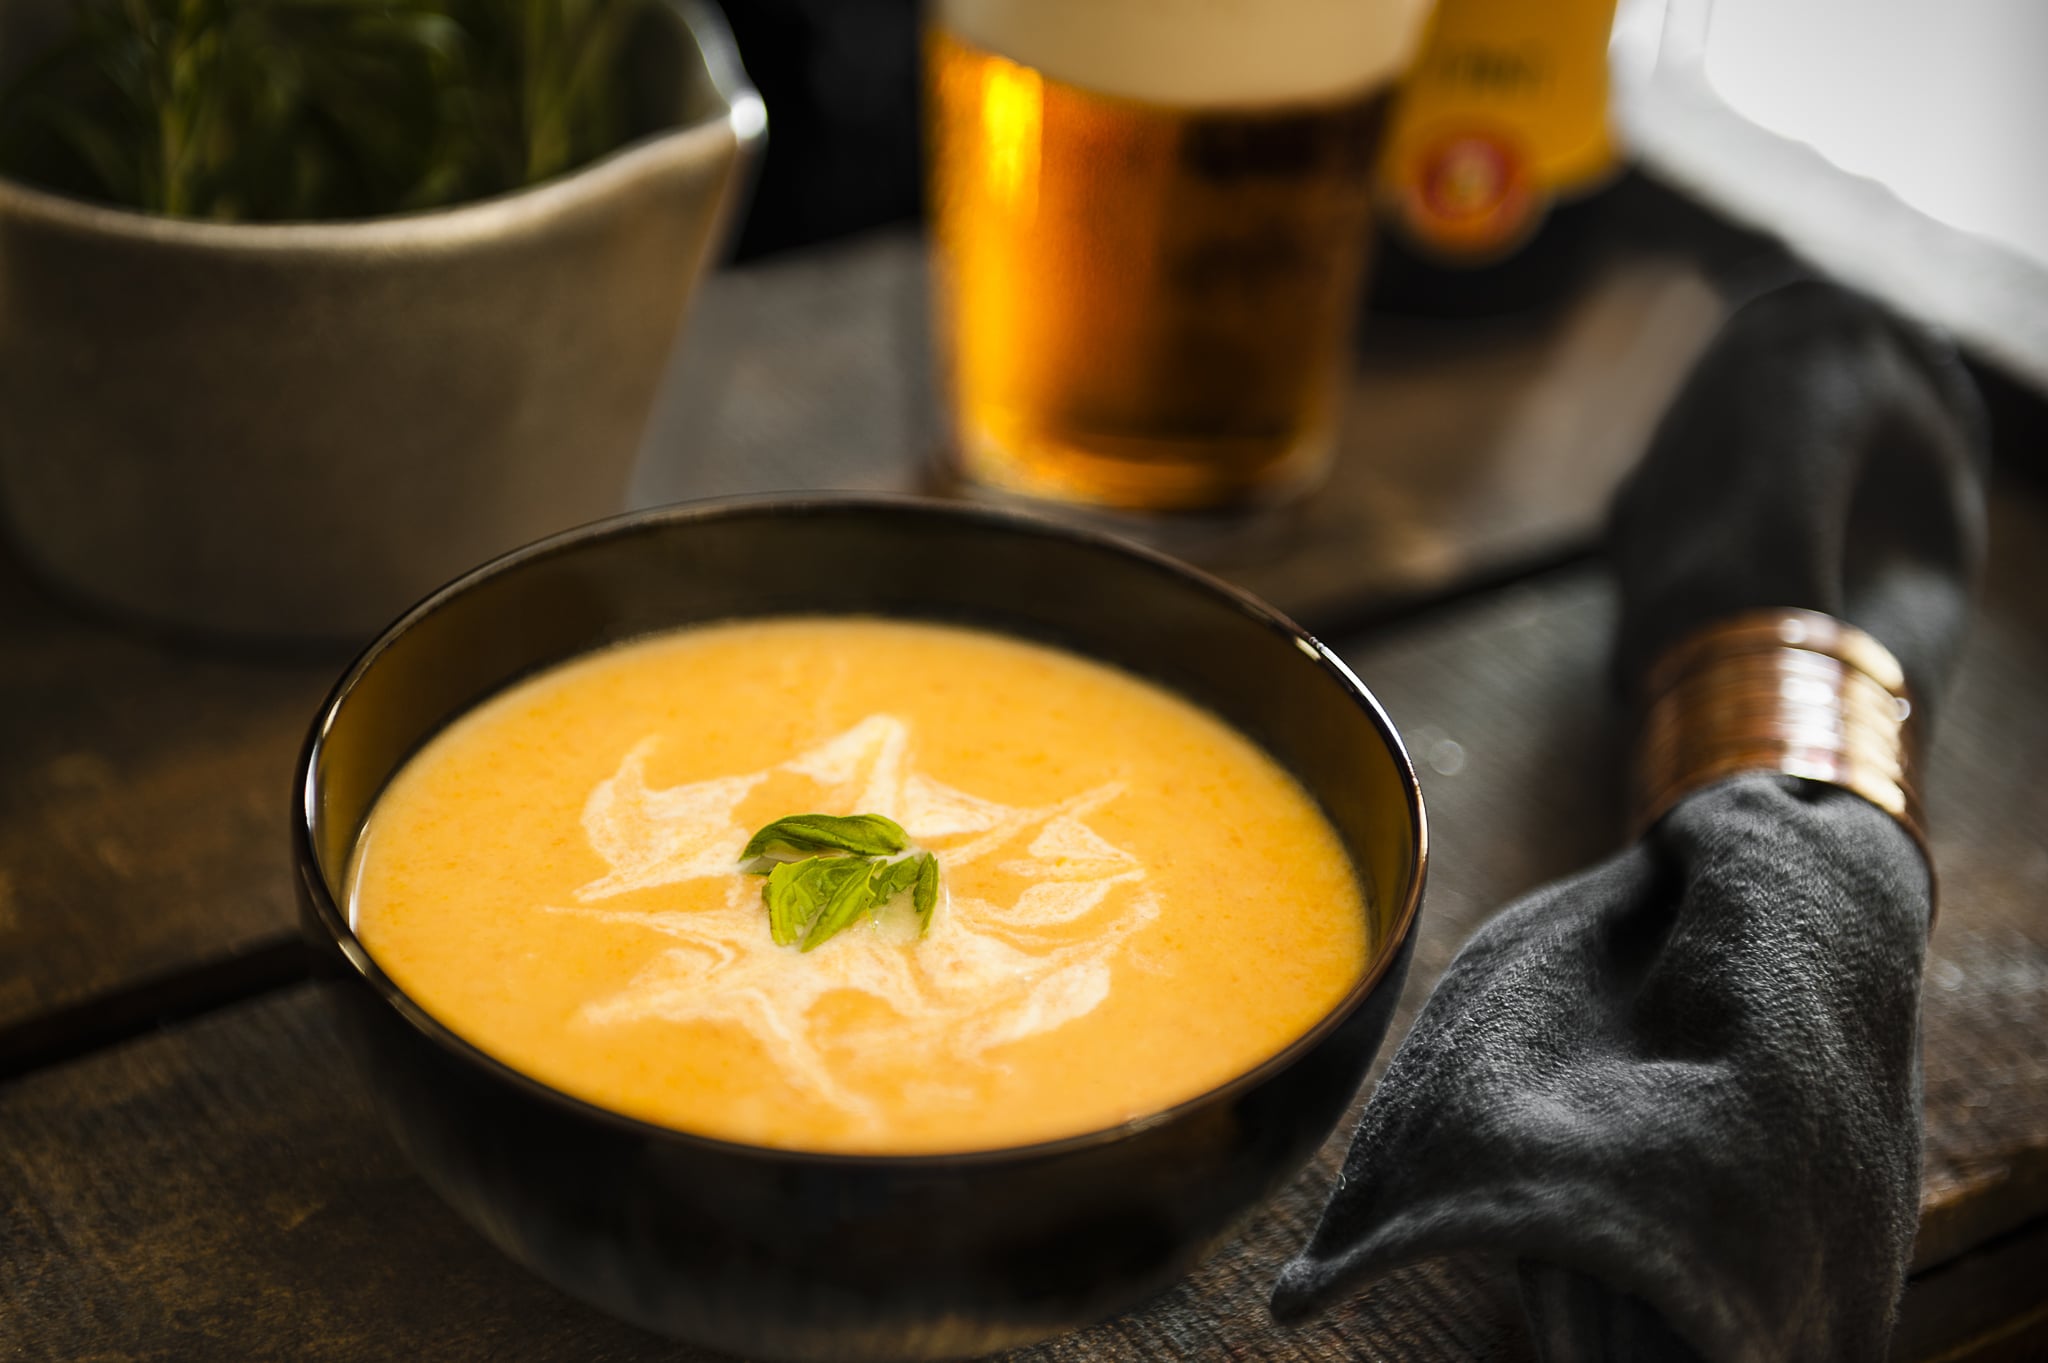 A bowl of soup with a glass of beer in the background.